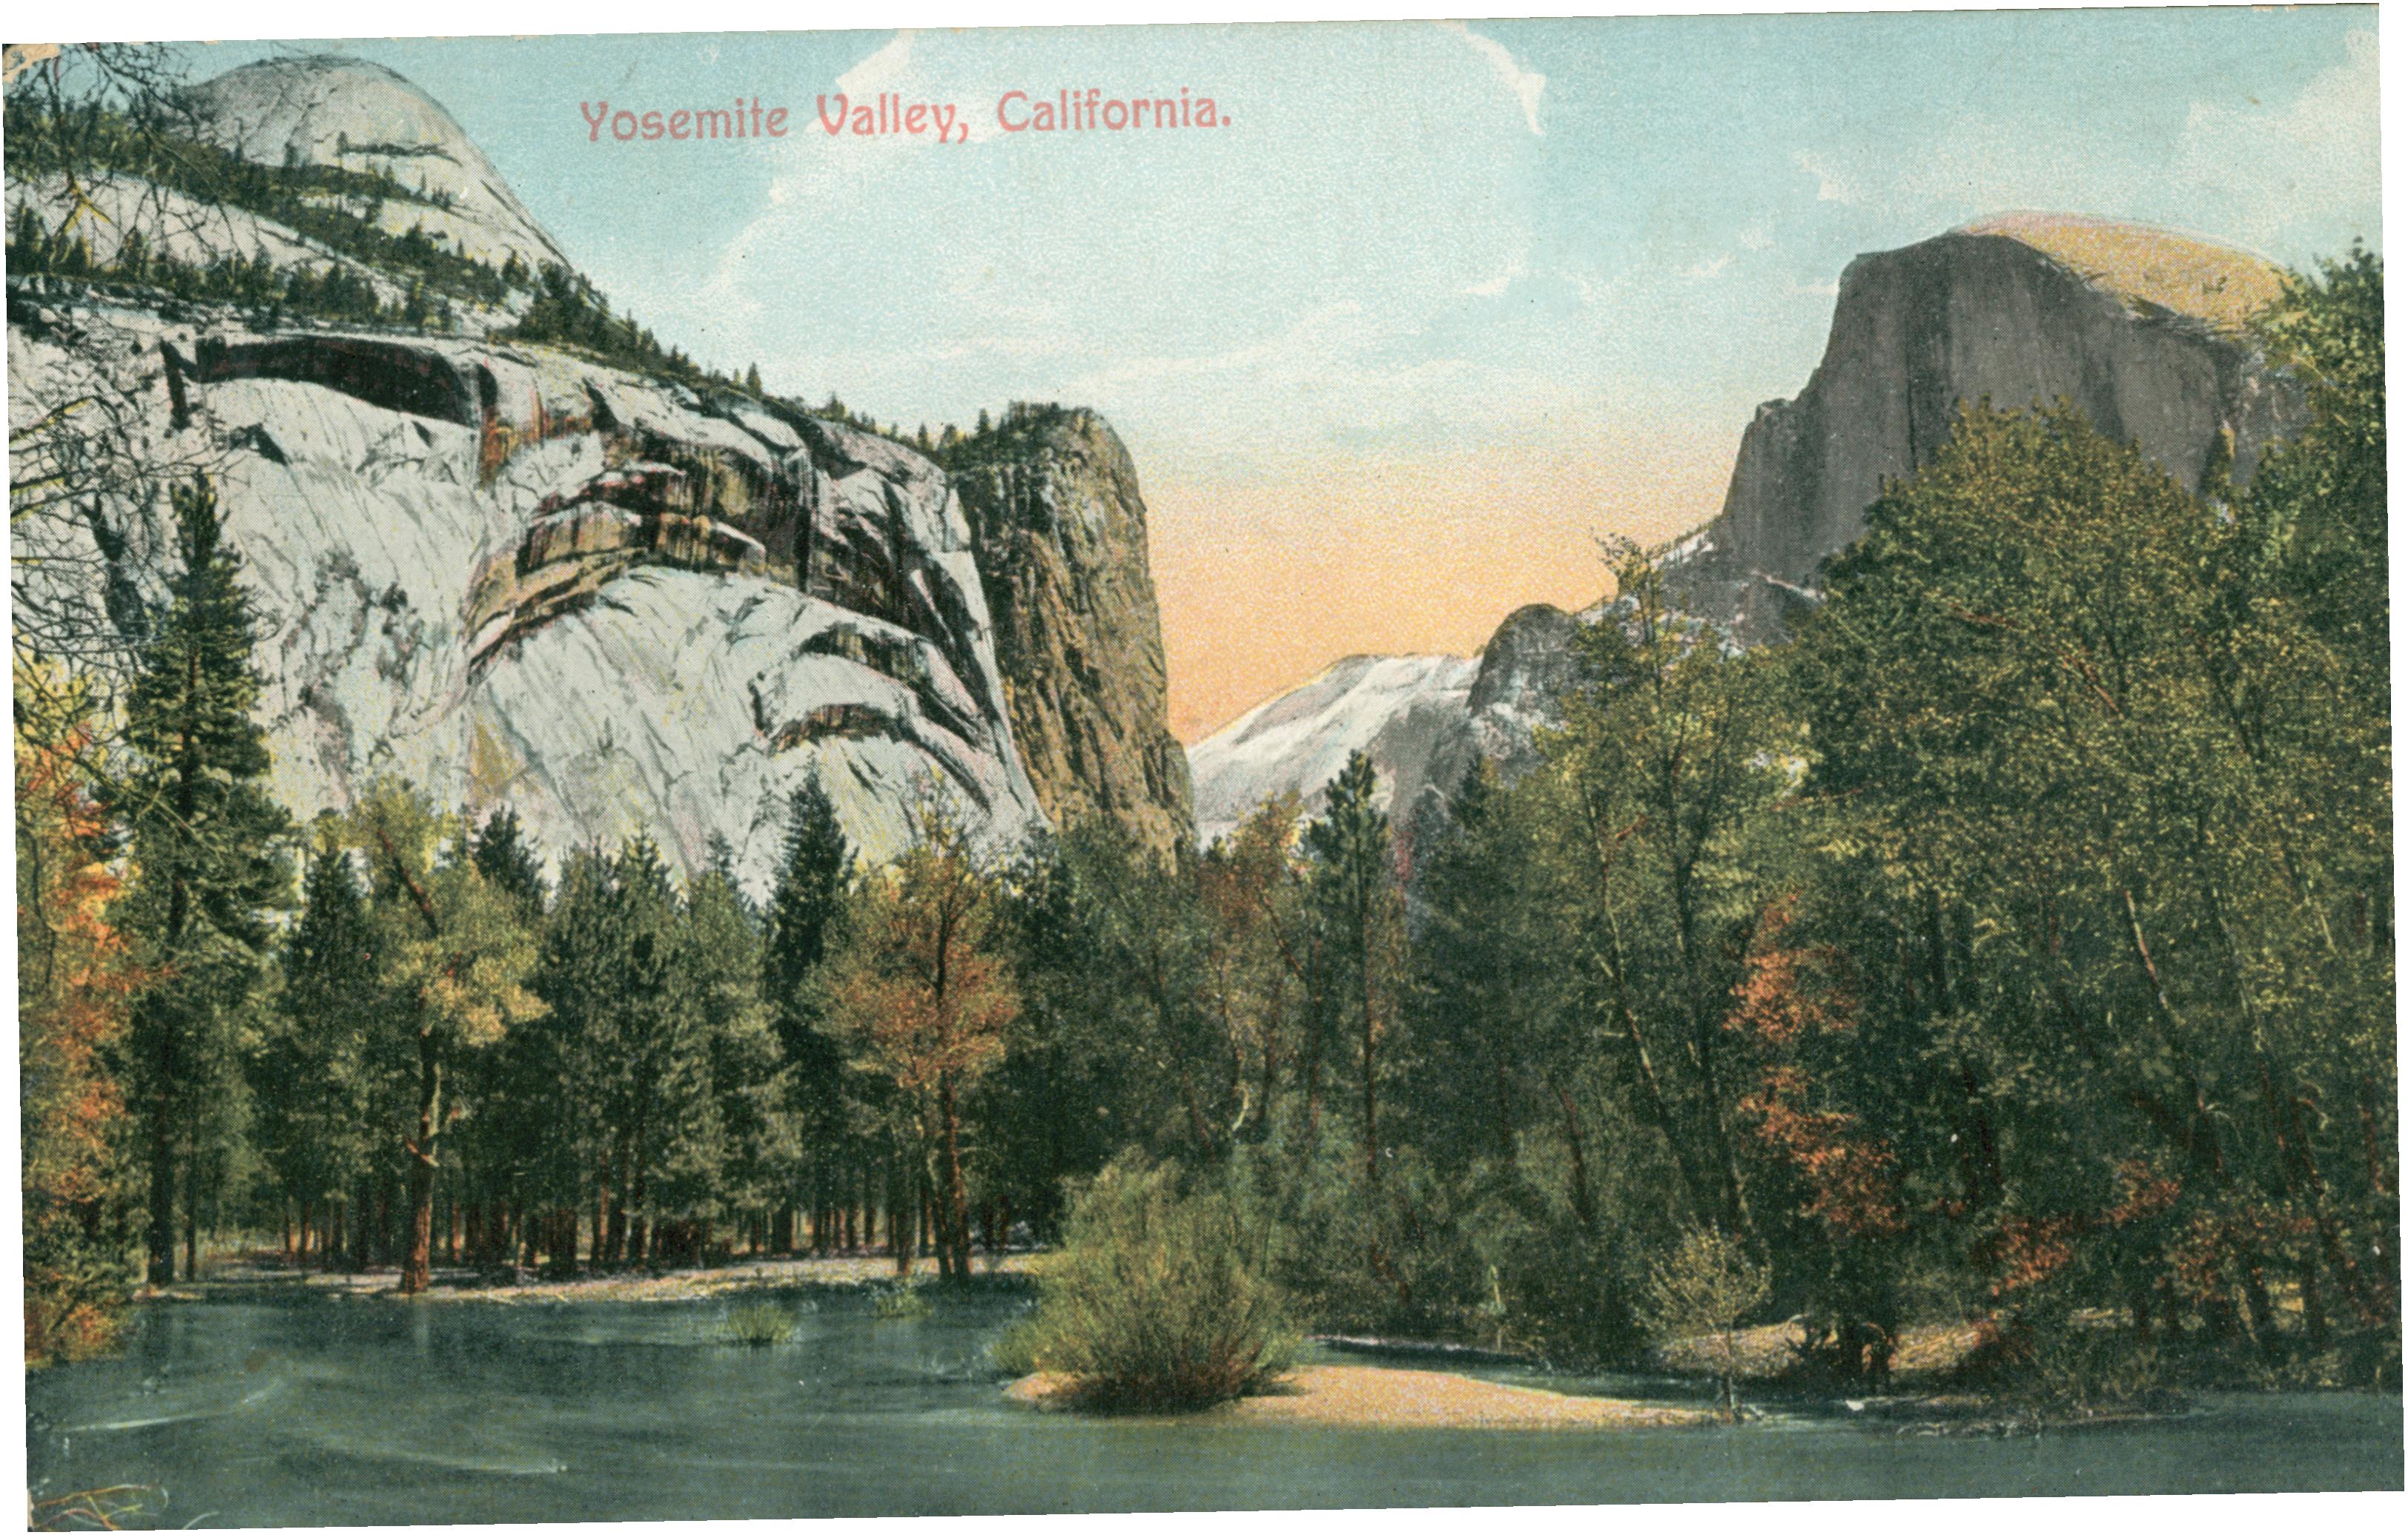 Shows a tree-lined body of water with half-dome in the background